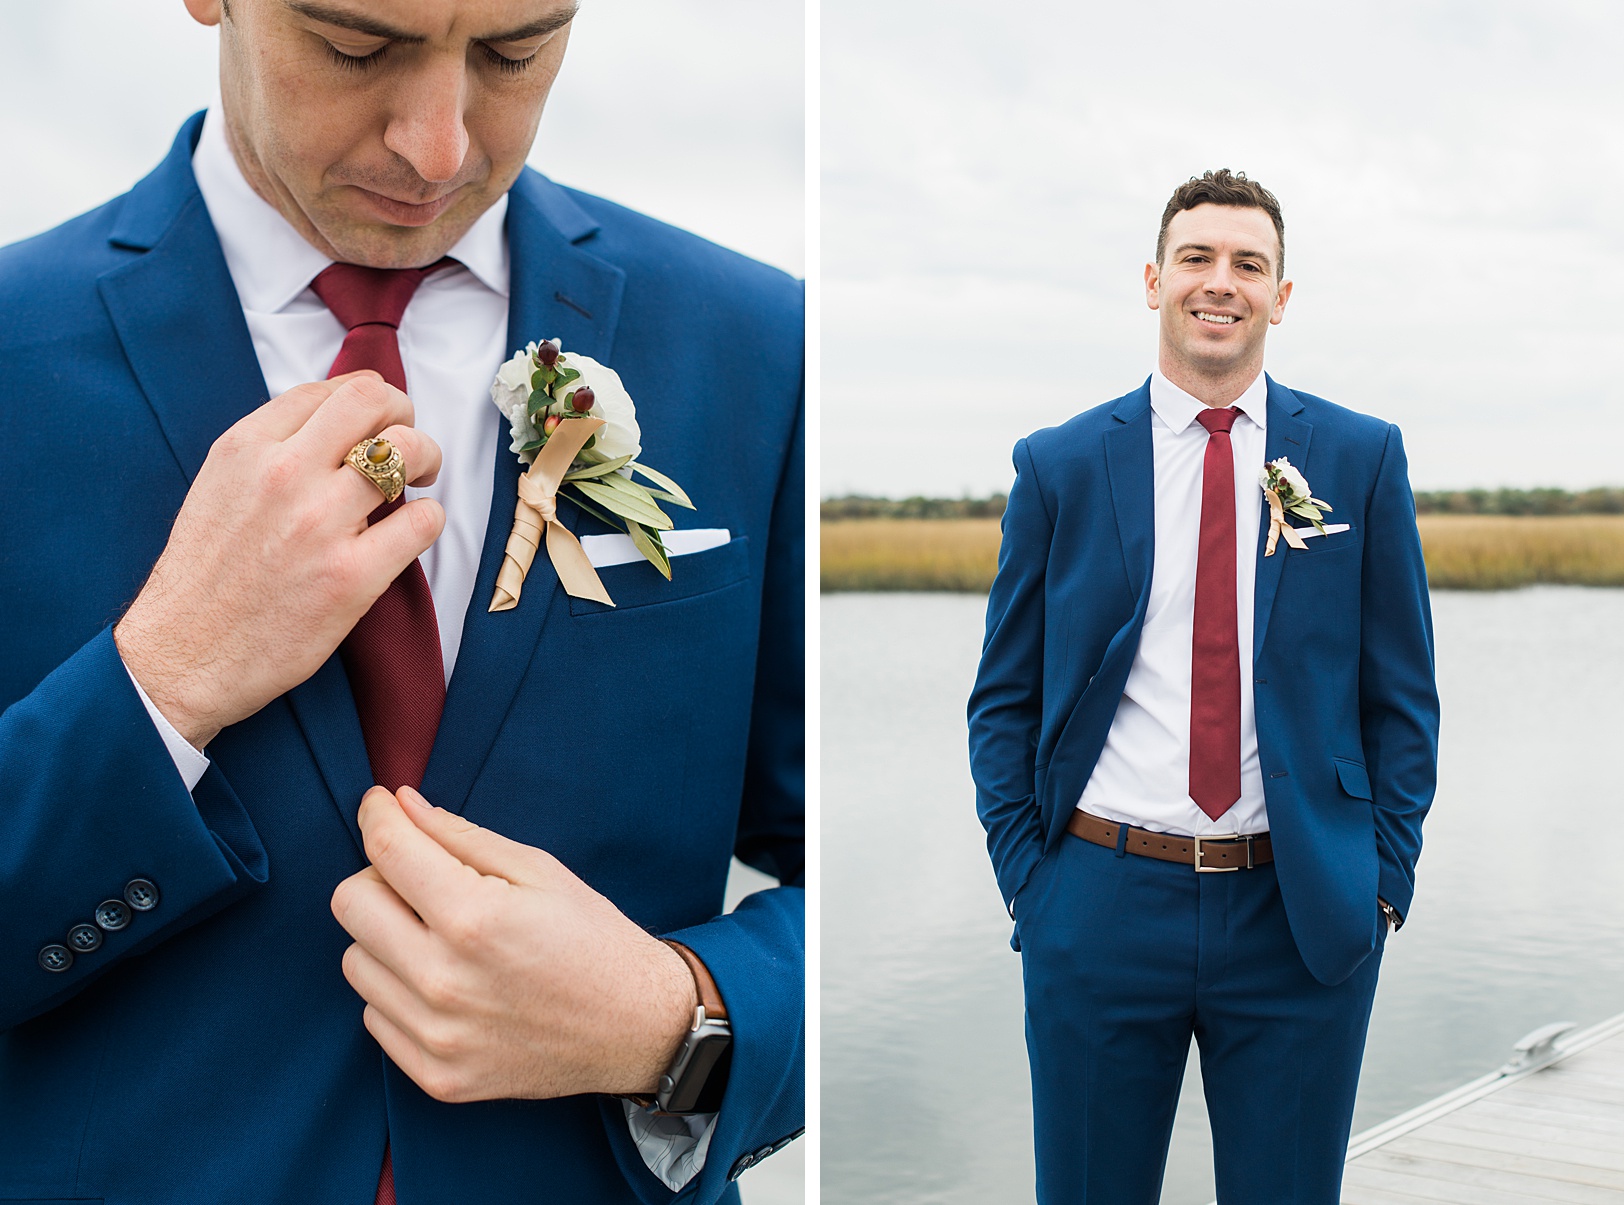 Groom in blue suit with burgundy tie for winter wedding | Kaitlin Scott Photography